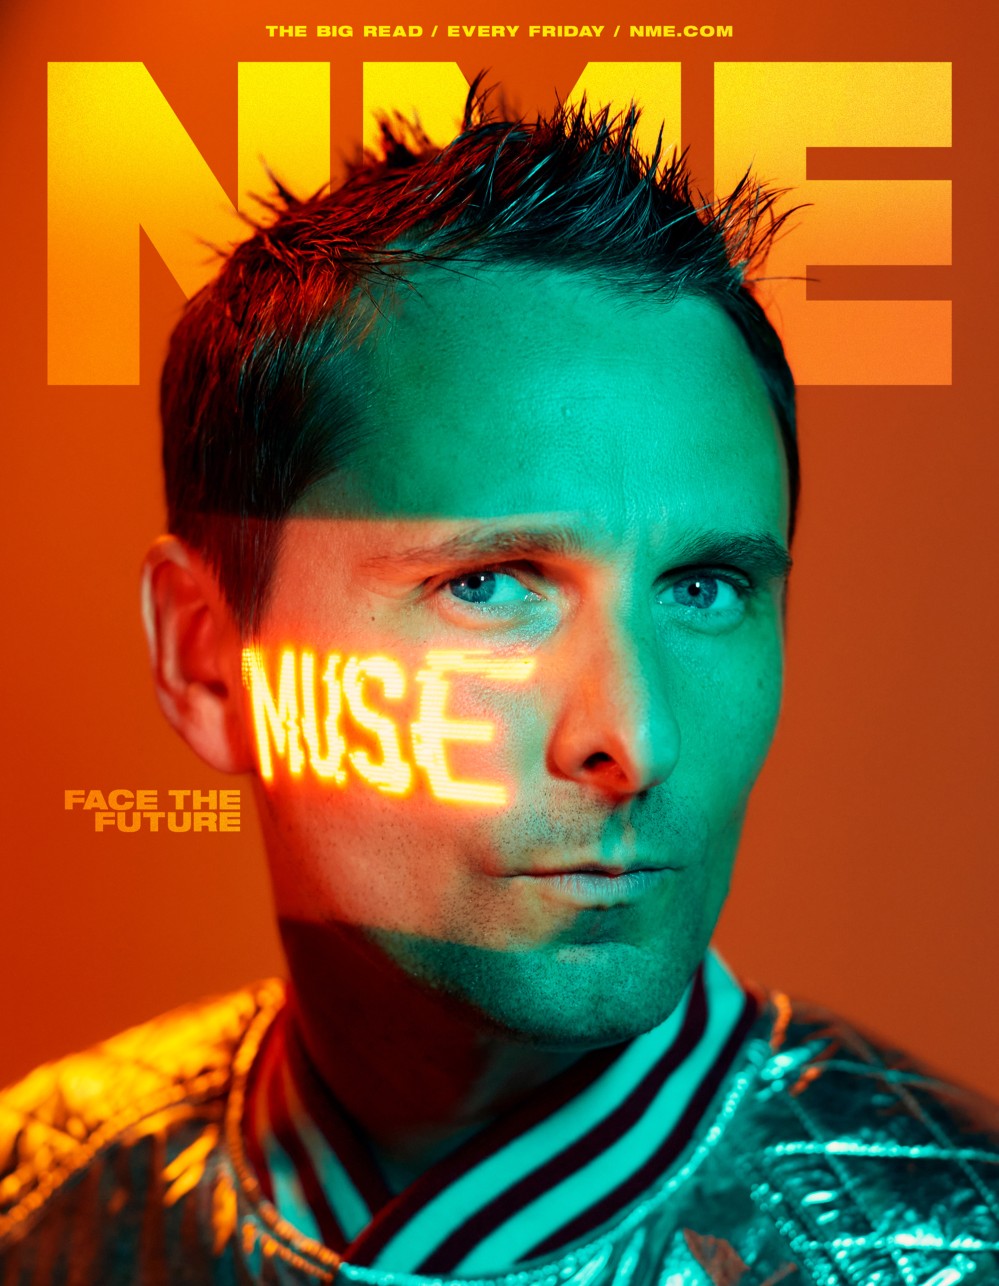 Matt Bellamy of Muse on the cover of NME